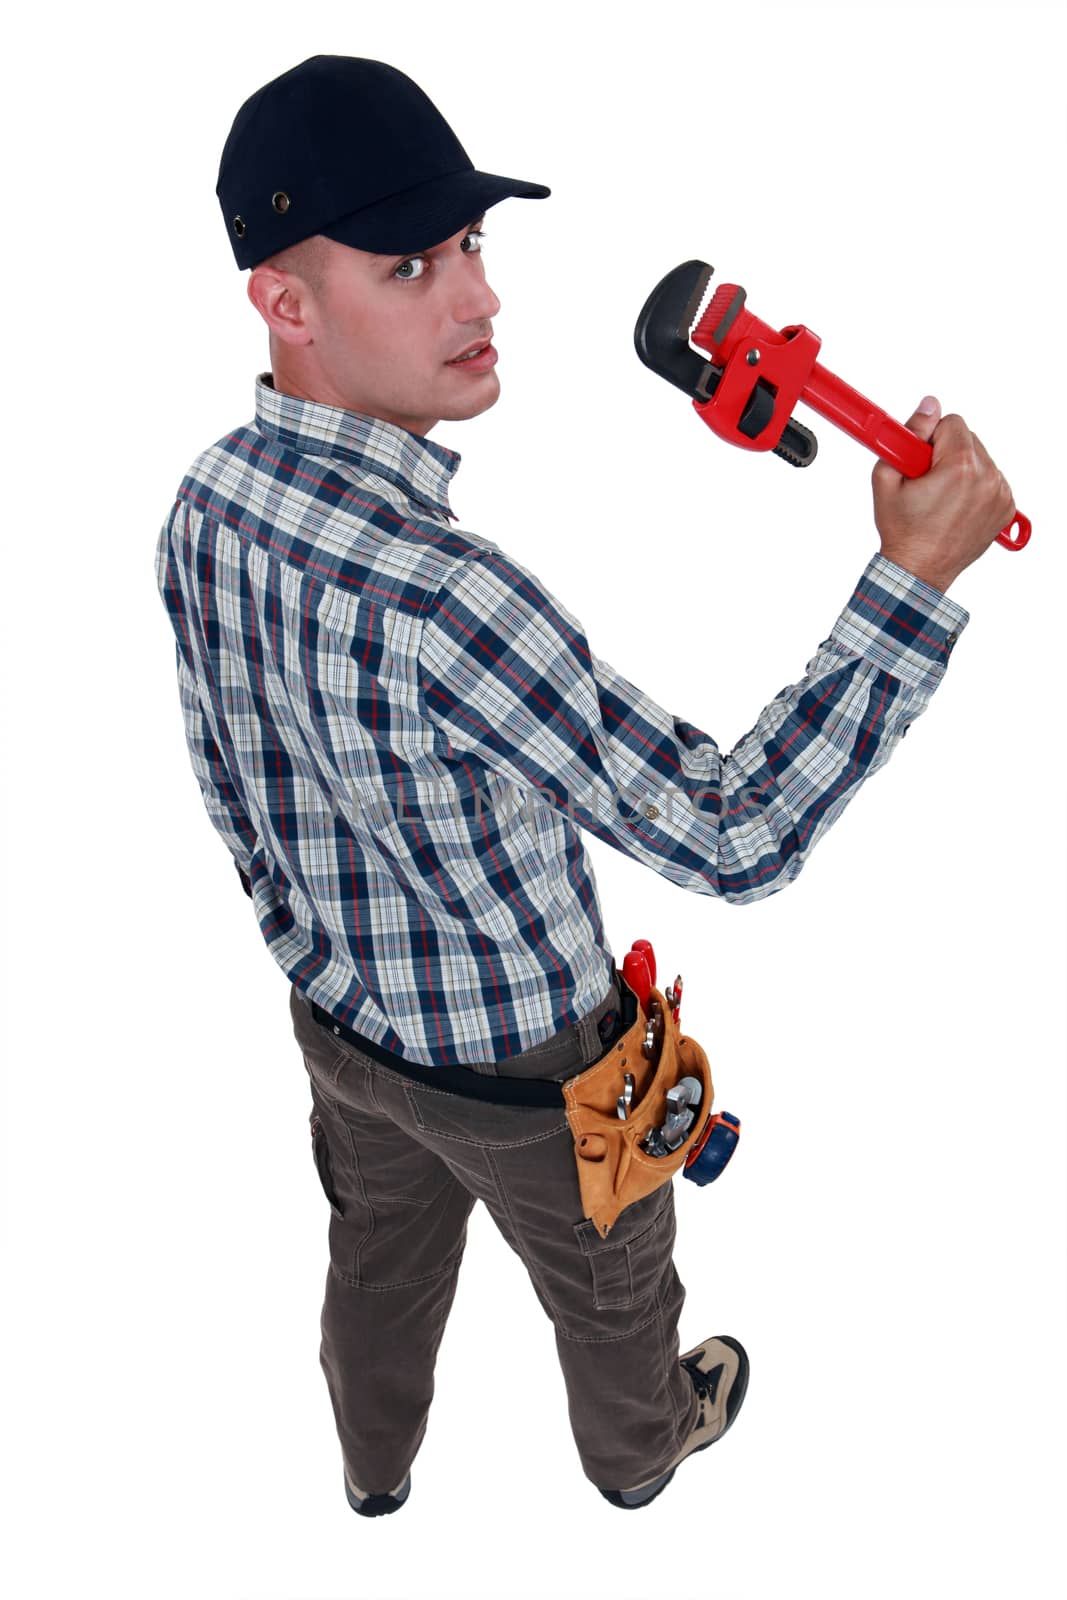 Worker with an adjustable pipe wrench by phovoir